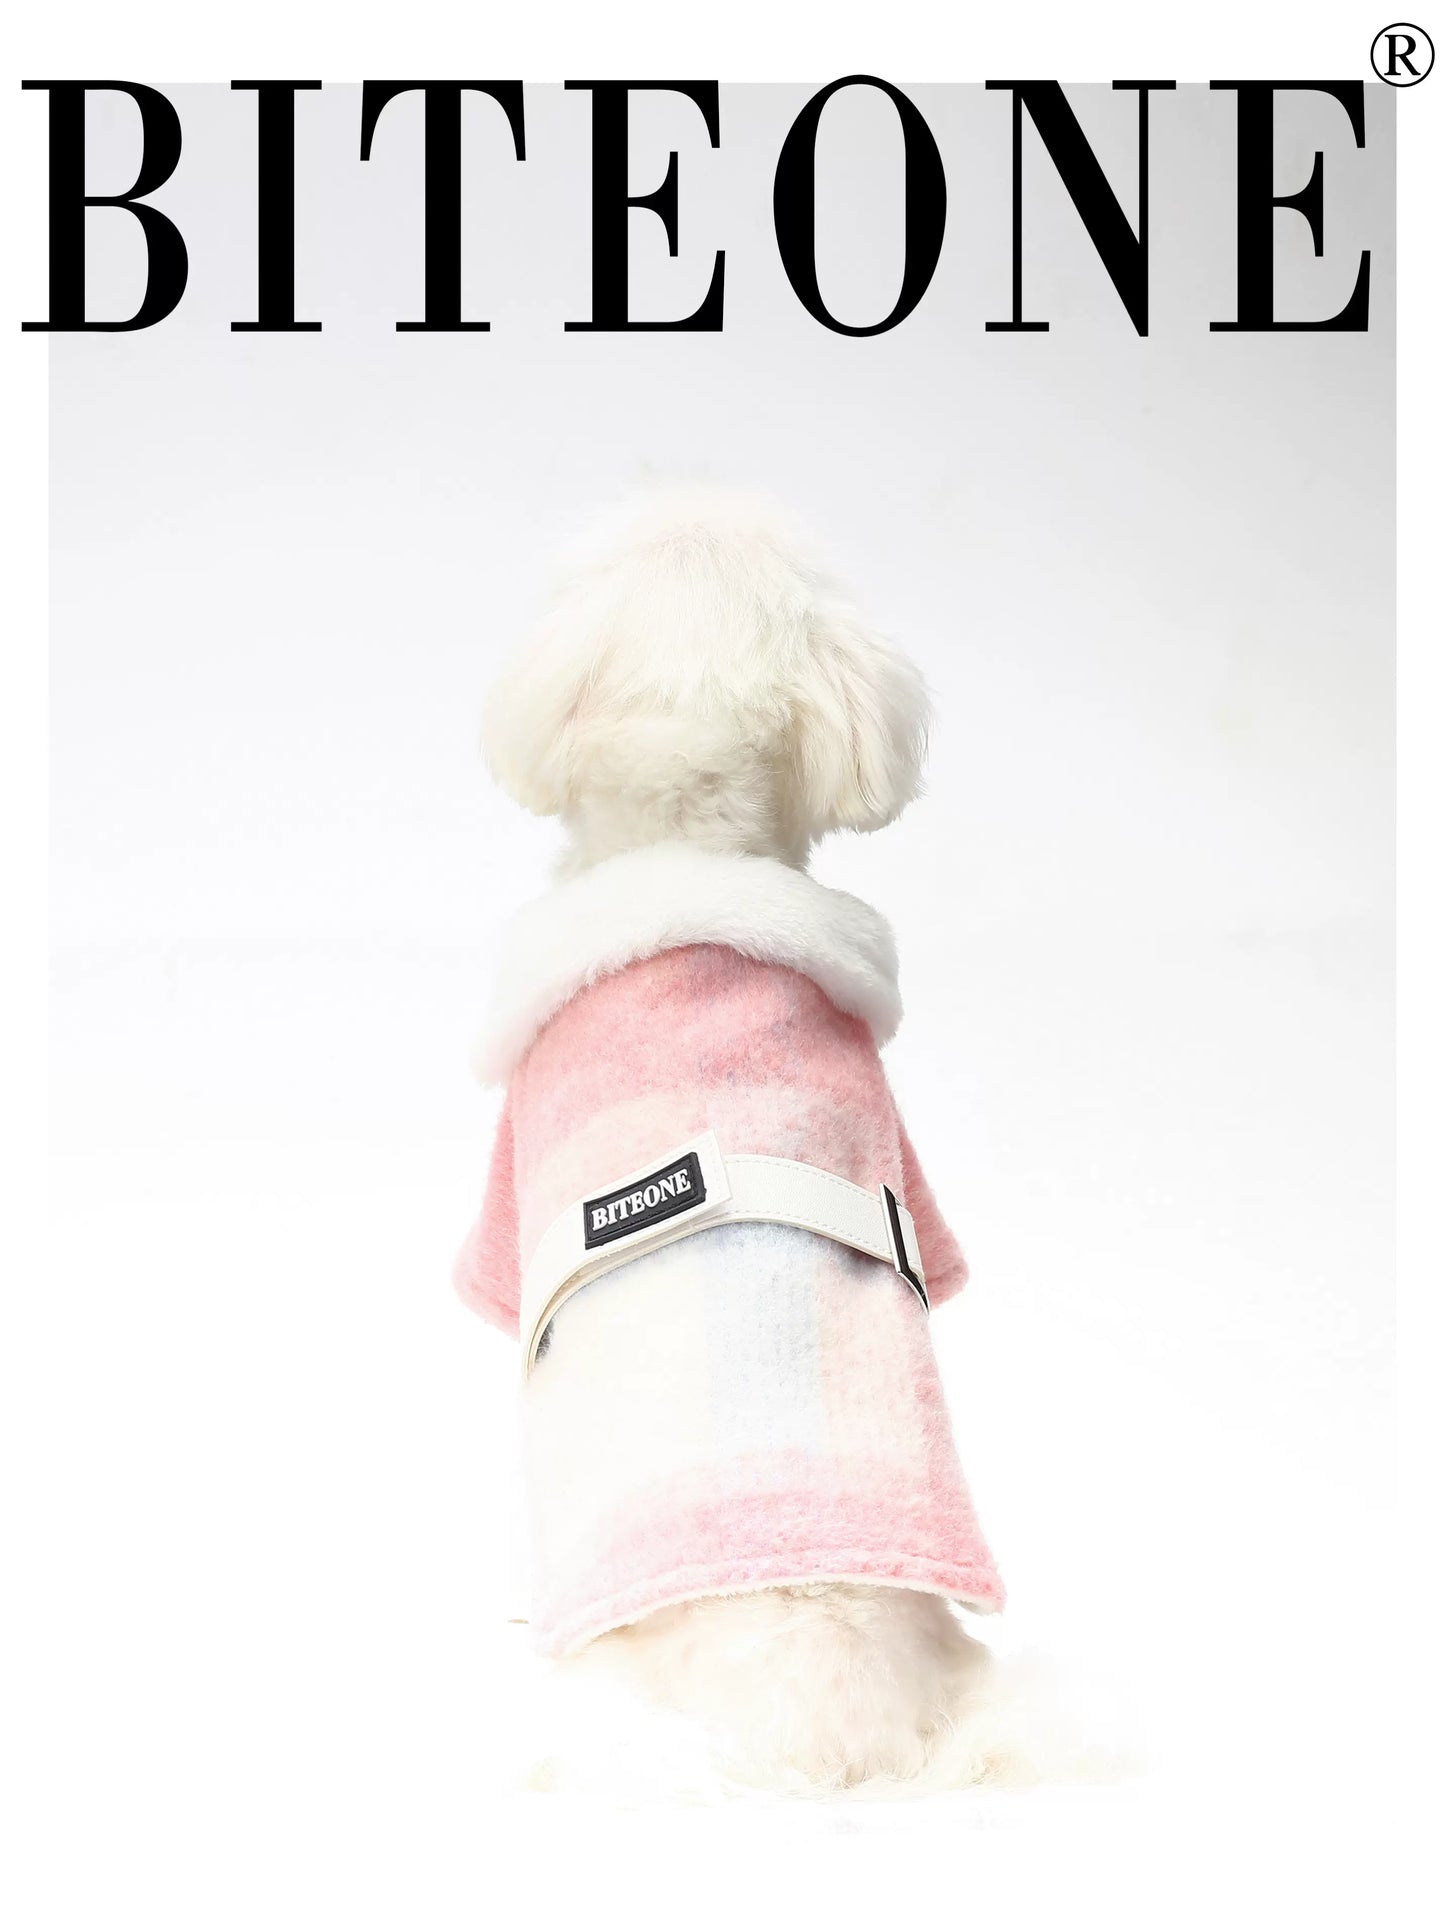 BITEONE Budapest: Pink Wool Pet Coat for Fall/Winter Chic